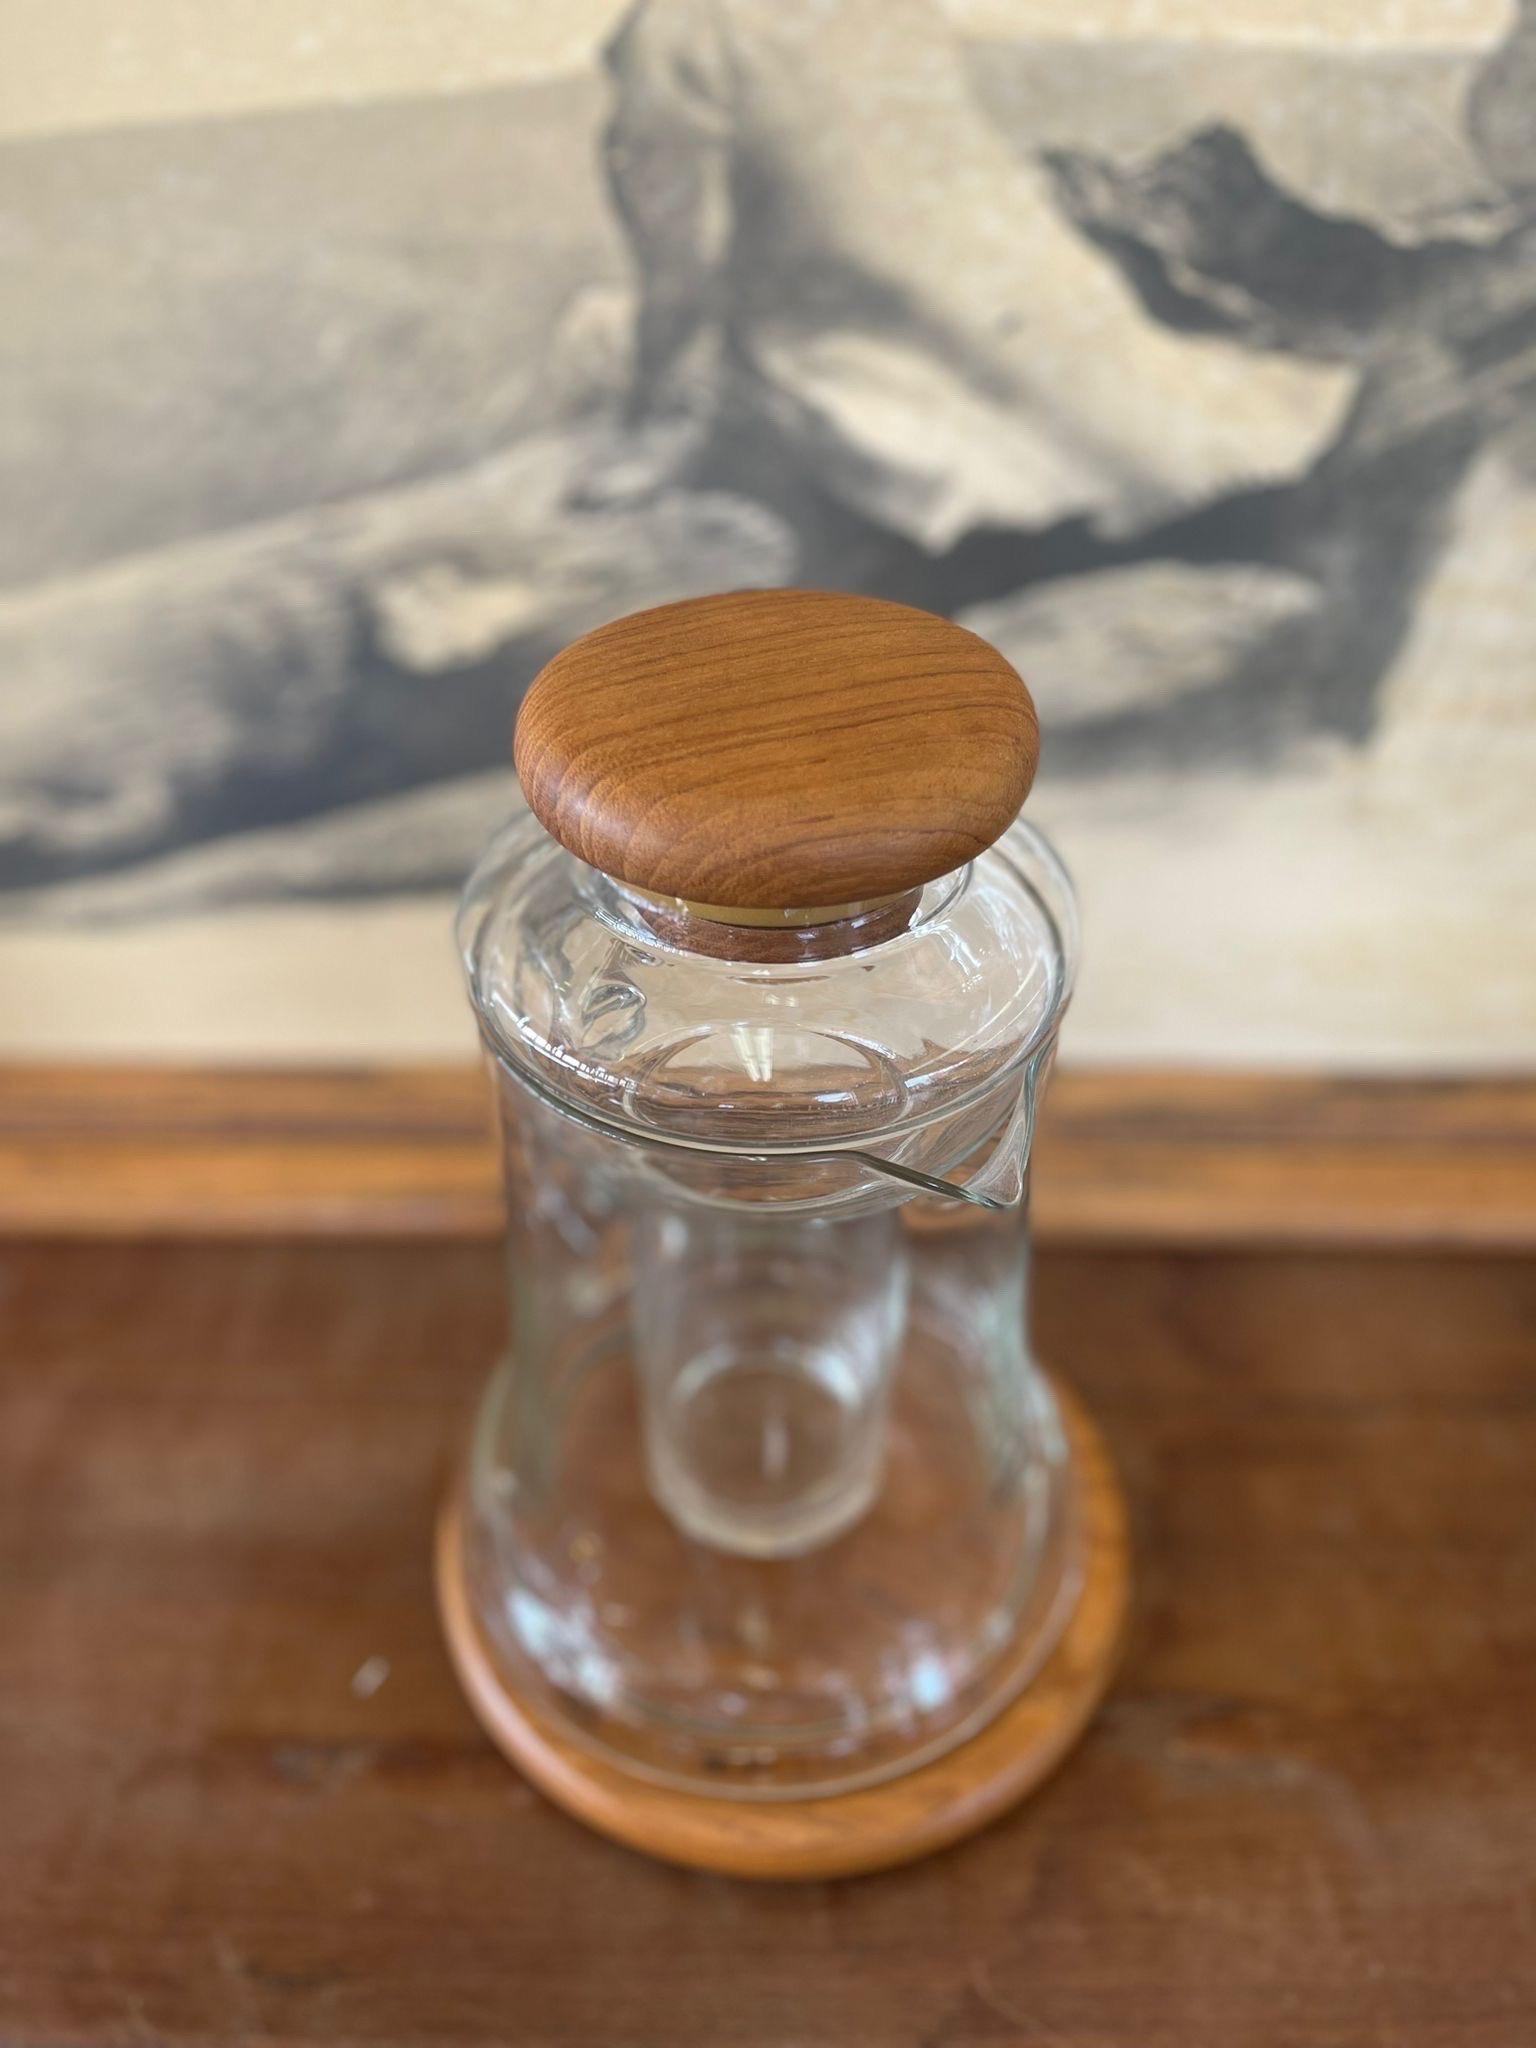 Pitcher is Glass or Similar Material. Teak Base and Lid have Makers Sticker as Pictured. Inner Layer of Pitcher can be Used to Fill with Ice to Keep Drinks Cold.

Dimensions. 8 Diameter; 11 H